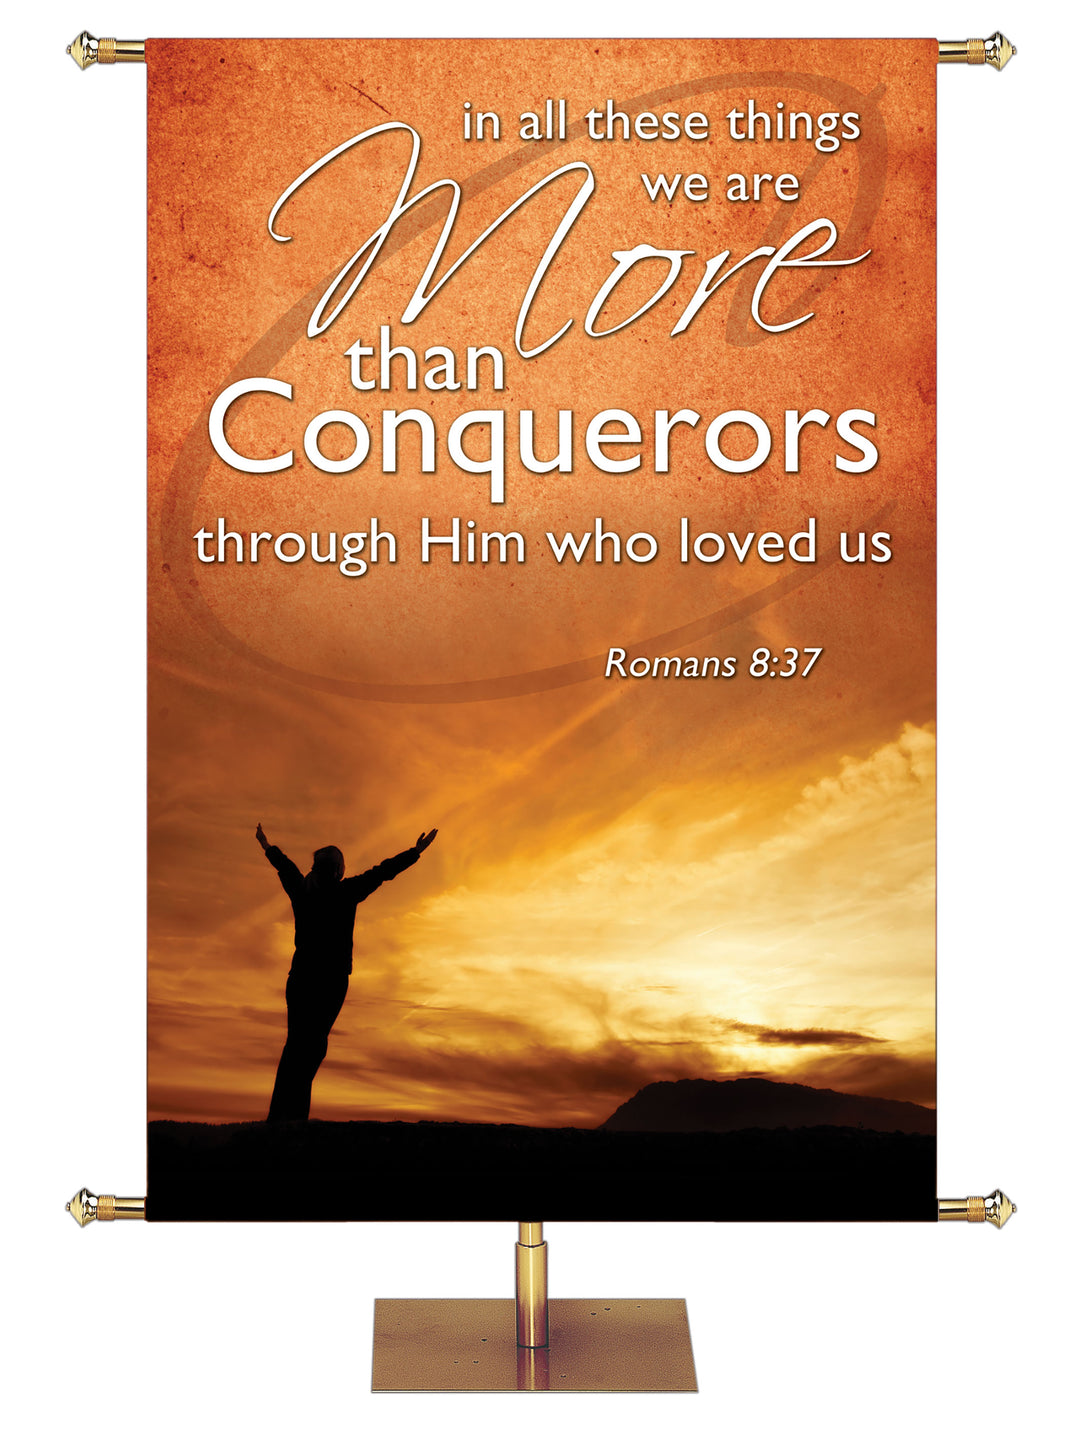 Expressions of Trust More than Conquerors - Year Round Banners - PraiseBanners